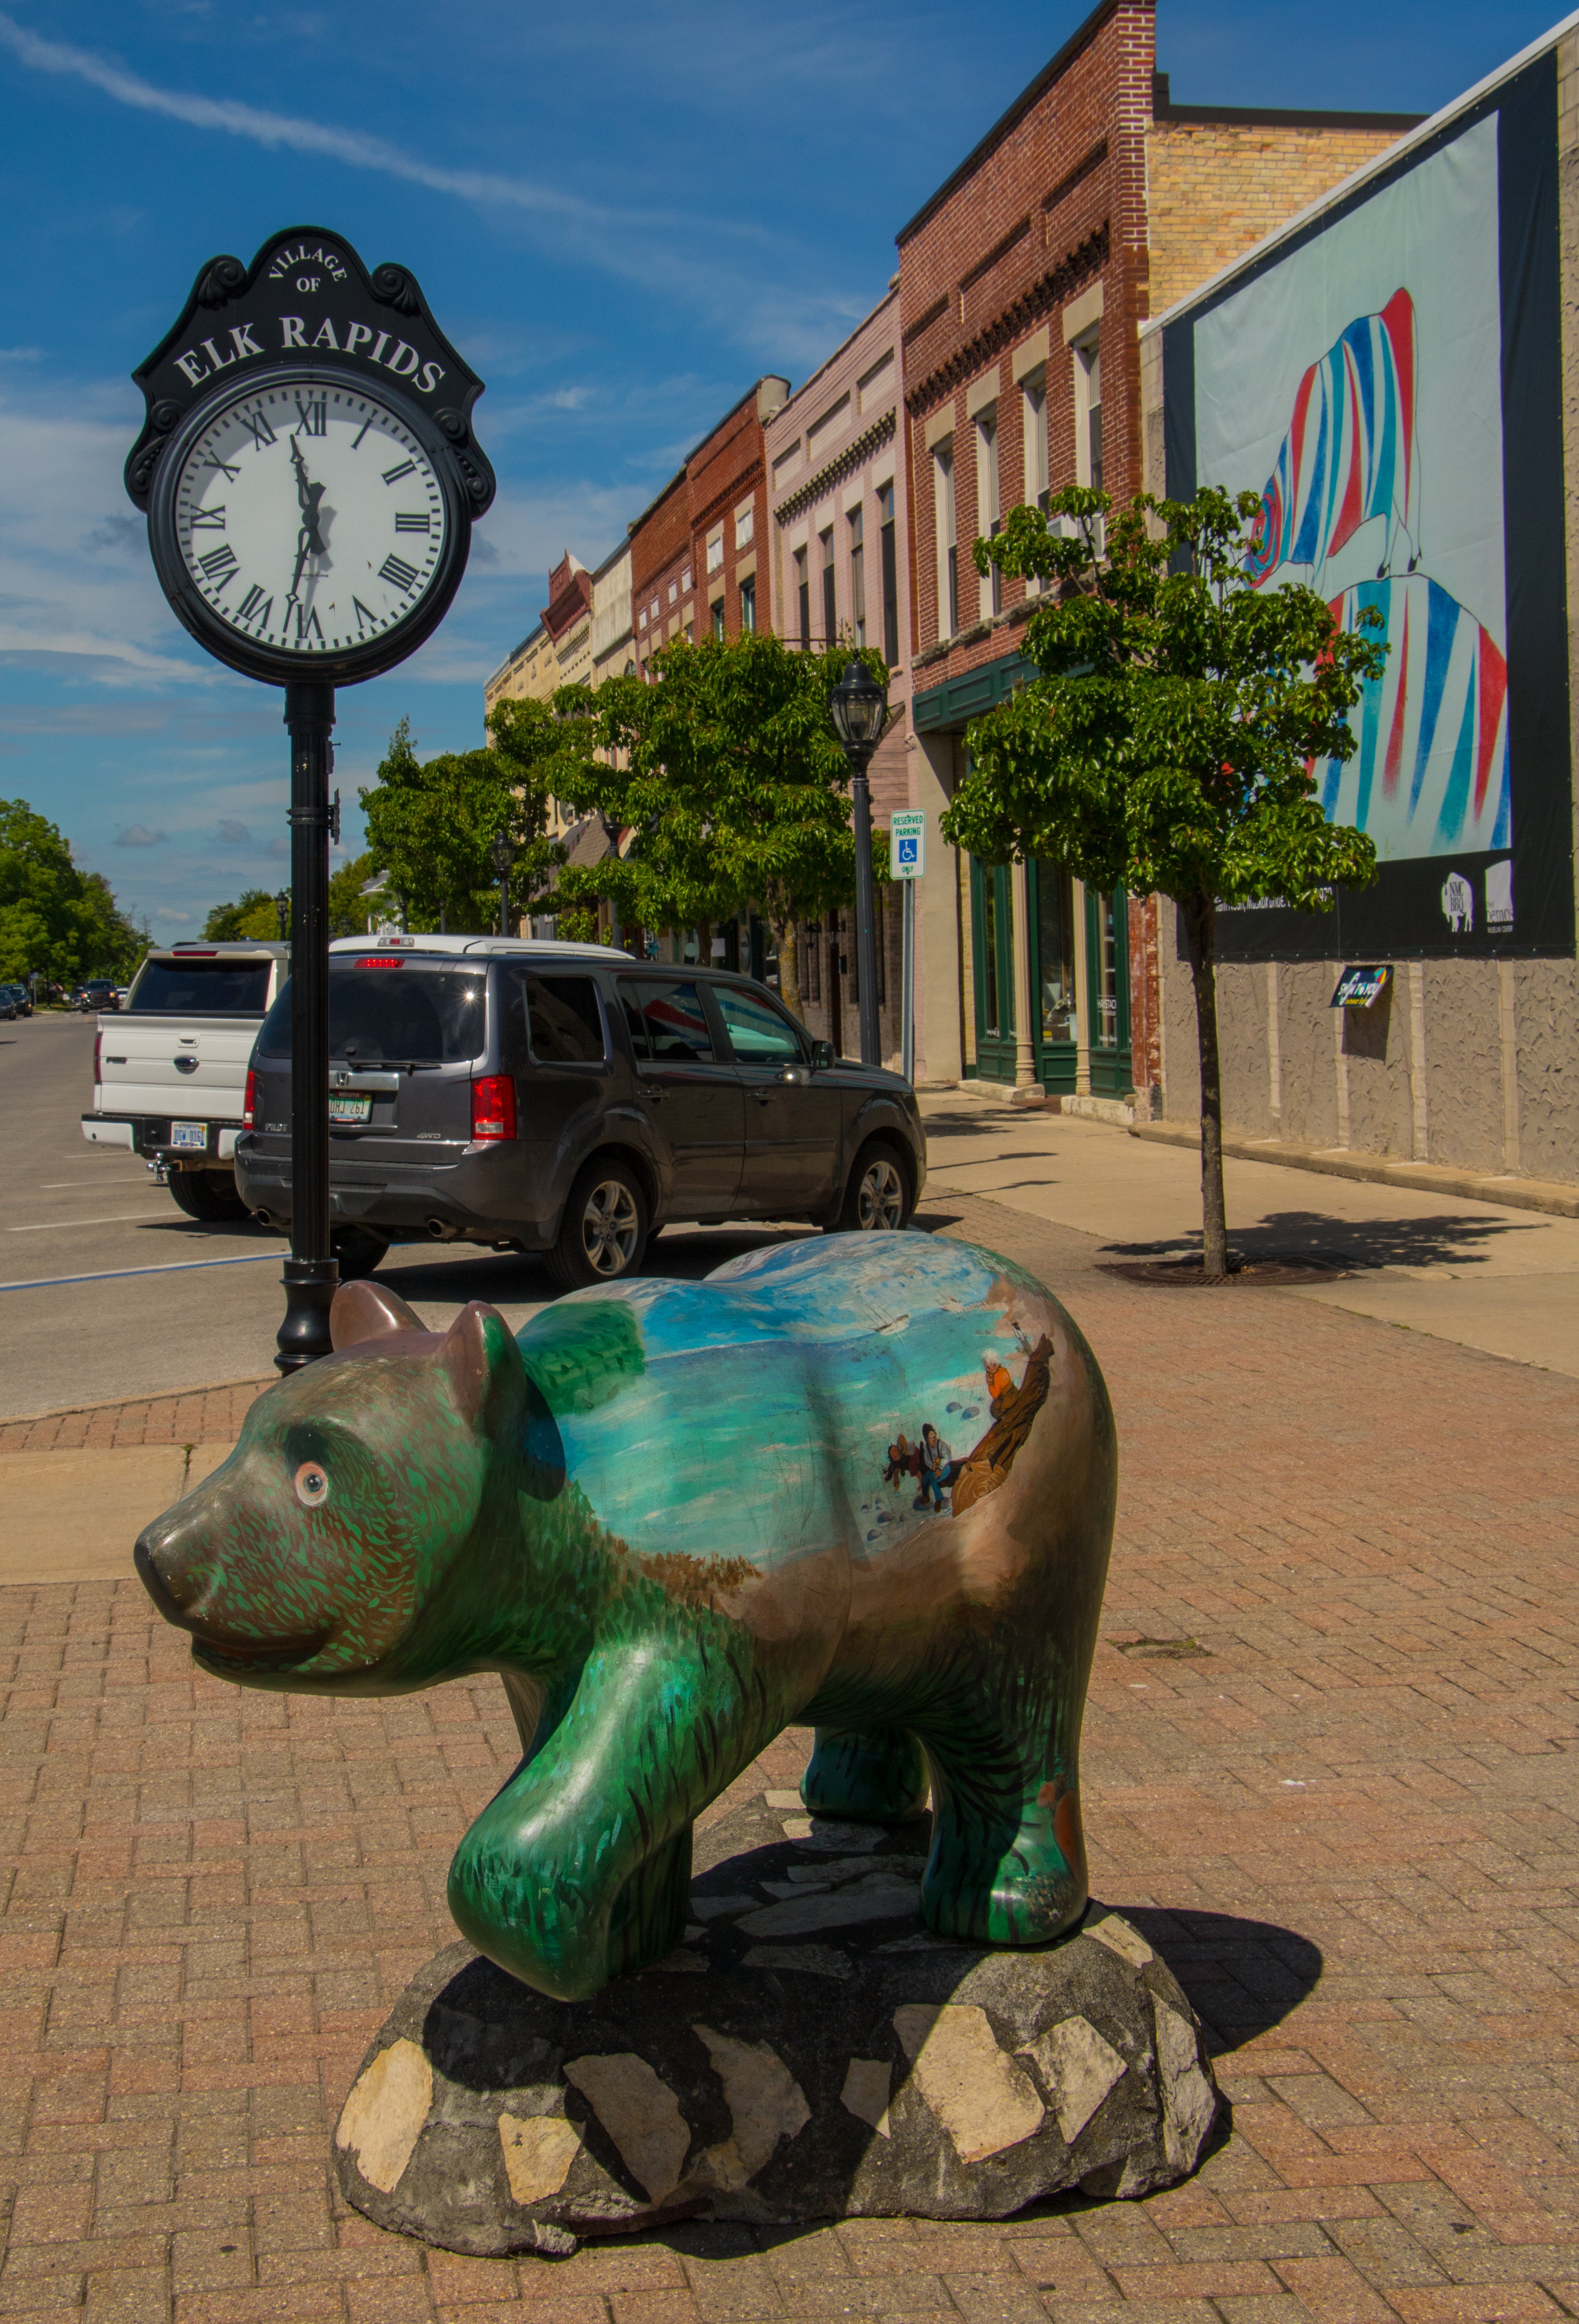 Downtown Elk Rapids is just a quick drive/cycle, or a nice walk from the campground.